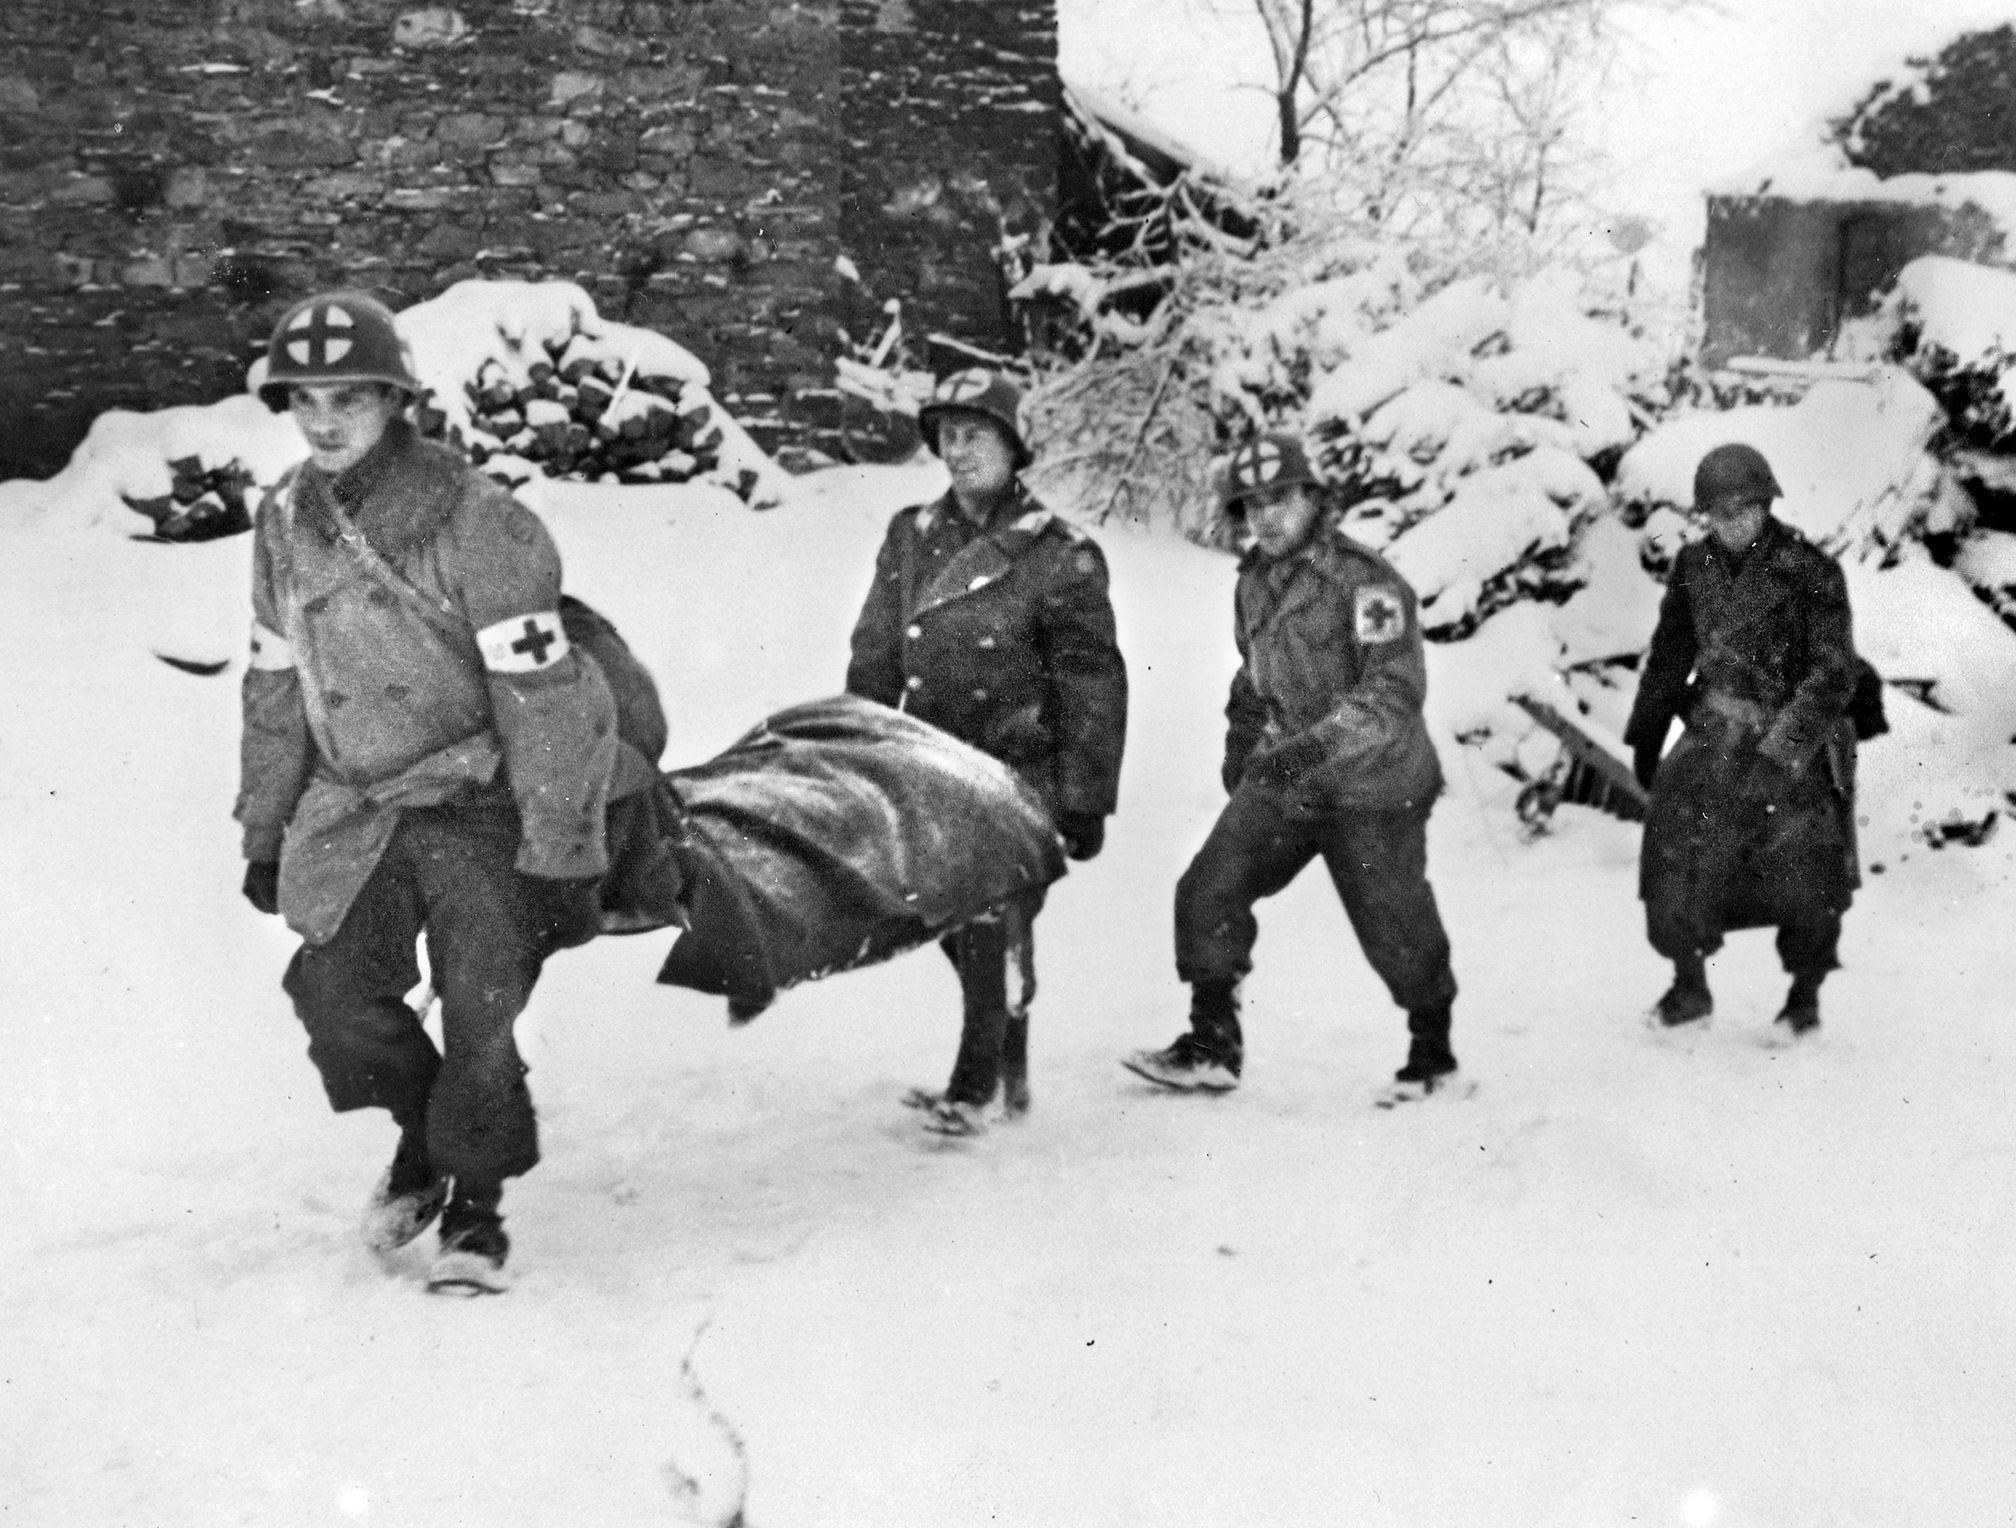 Army medics move a wounded soldier to safety during the Battle of the Bulge. Officers of the 326th Airborne Medical Company were worried that their position might be overrun, but Gen. Anthony McAuliffe, commanding the 101st Airborne Division, gave them repeated assurances that they were secure.